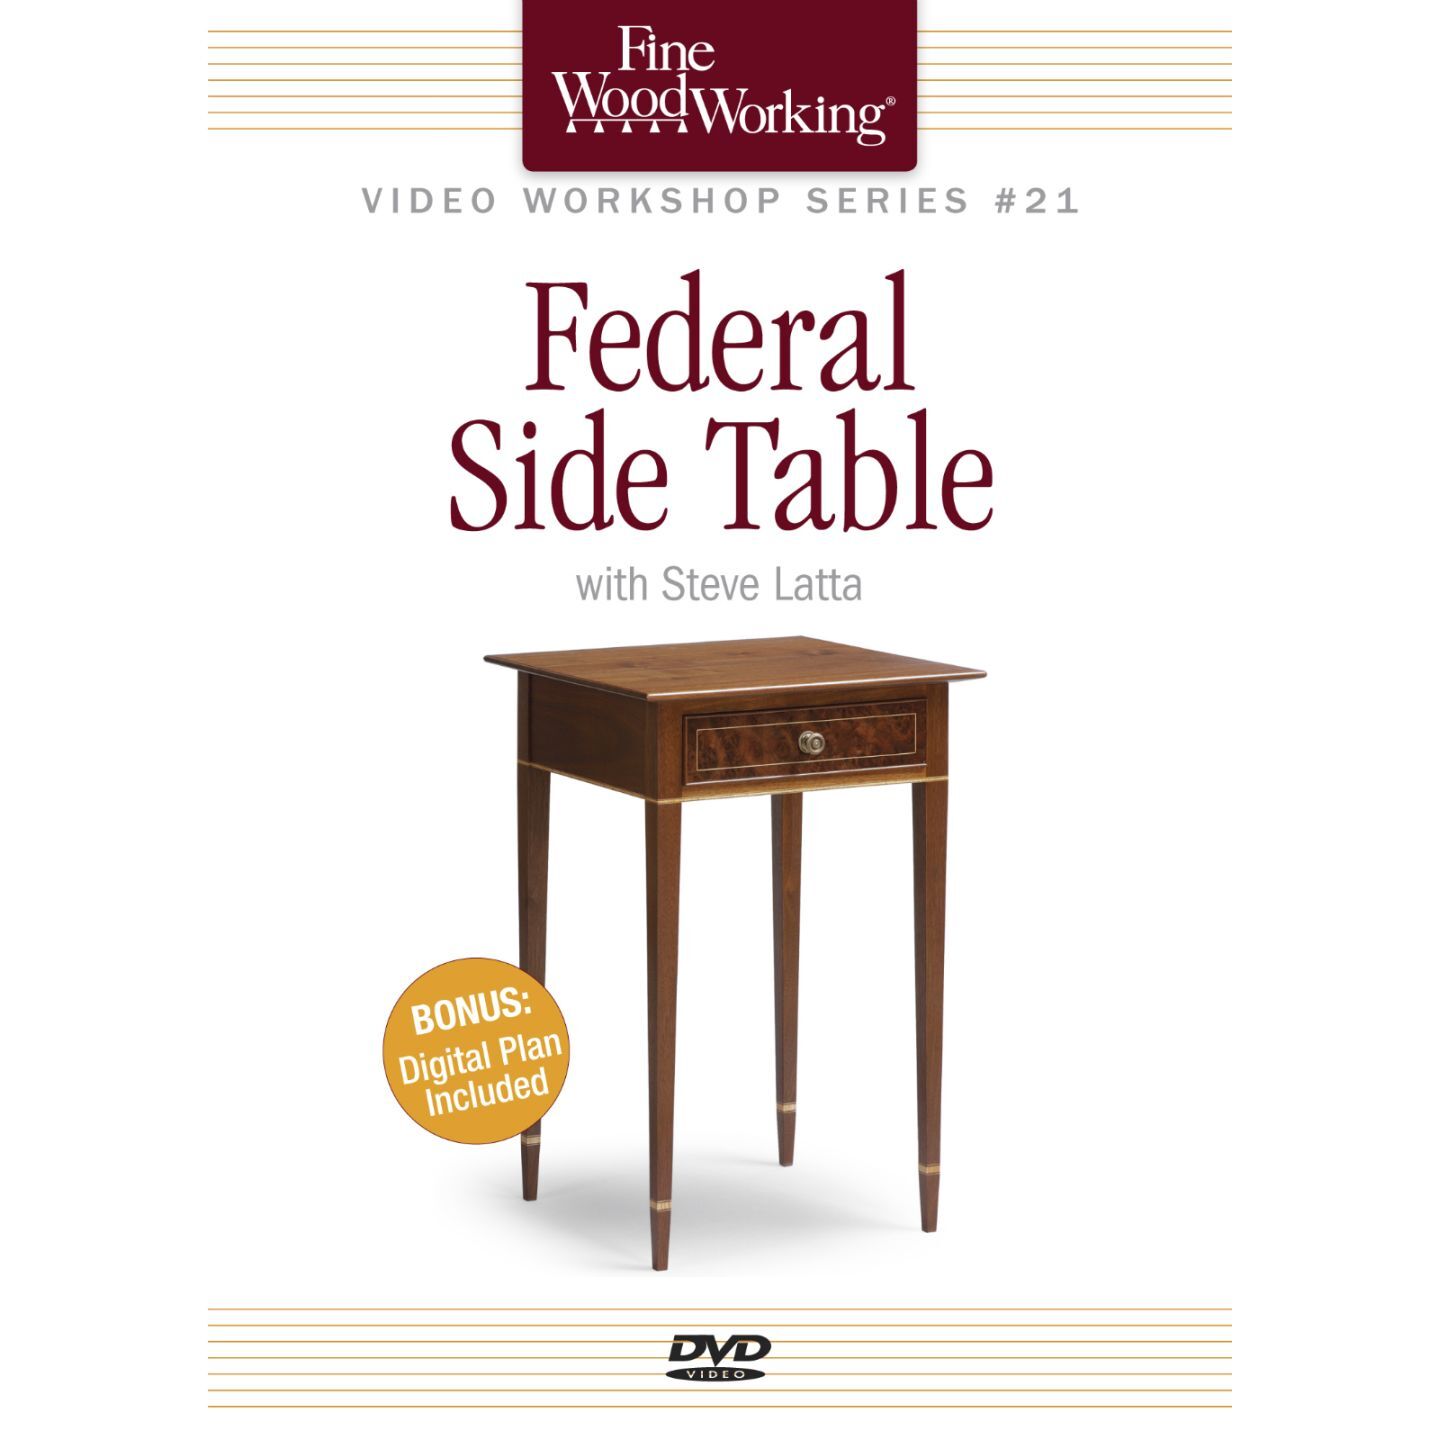 Federal Side Table - DVD